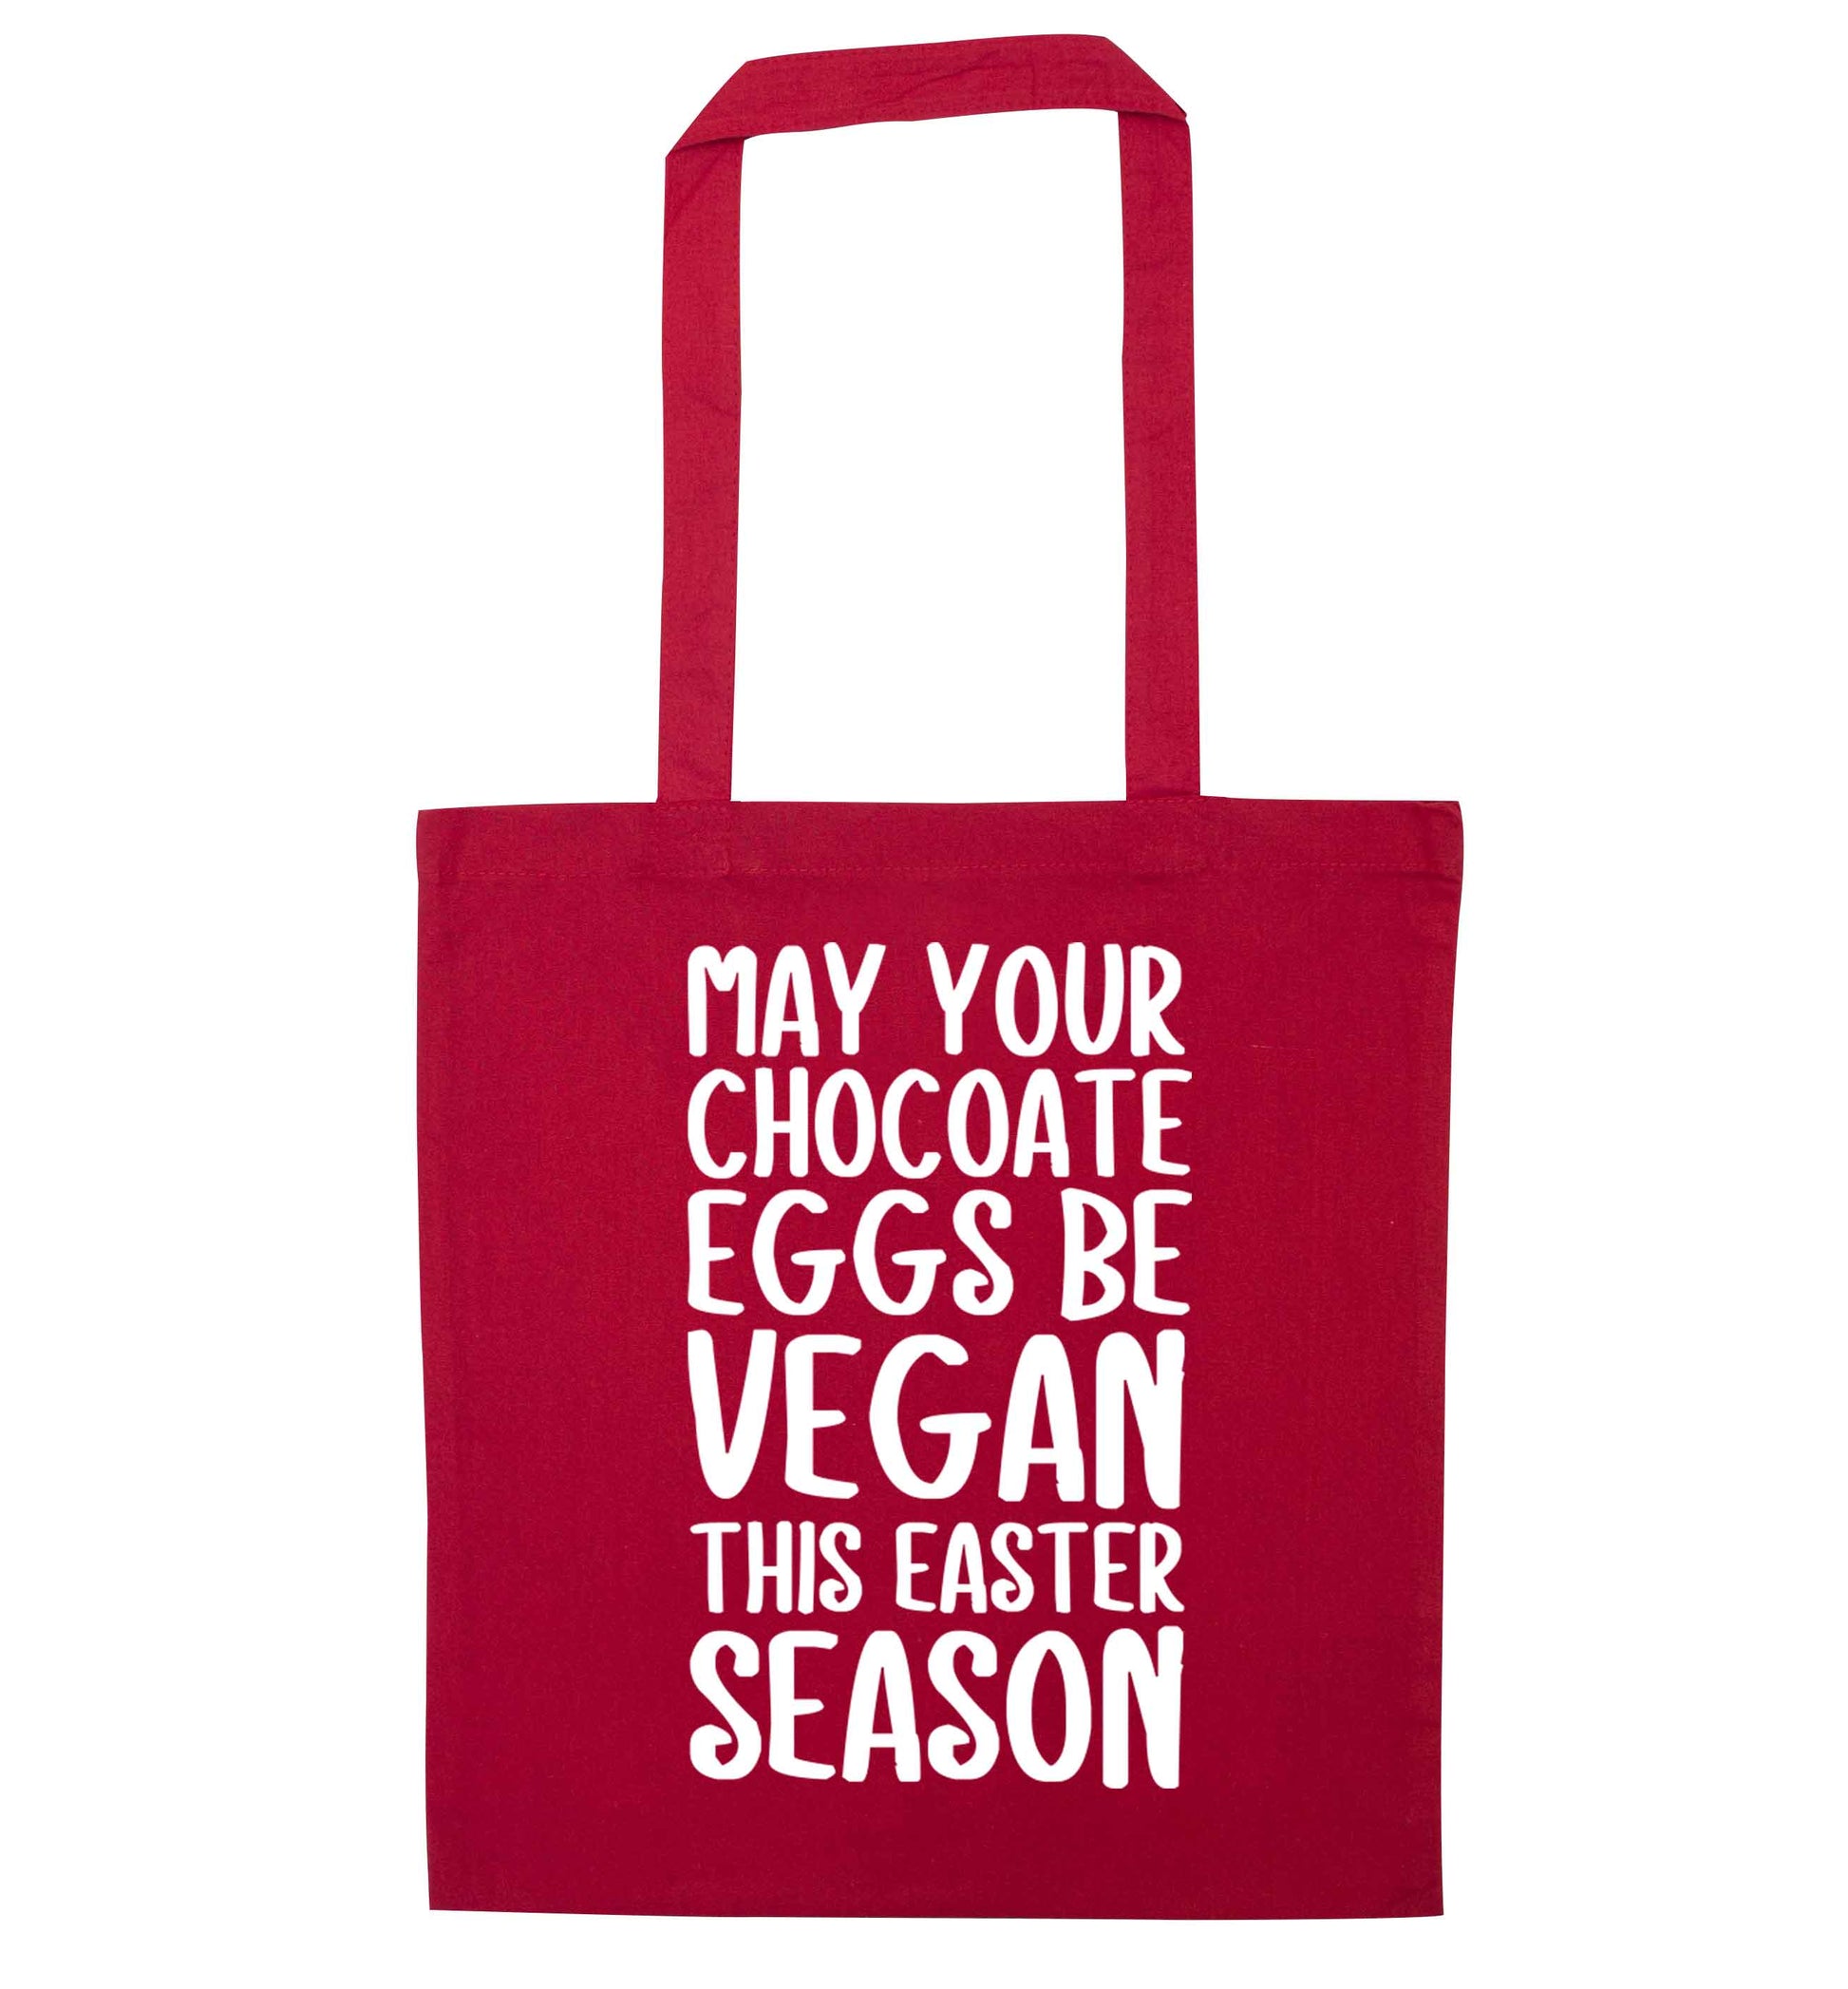 Easter bunny approved! Vegans will love this easter themed red tote bag